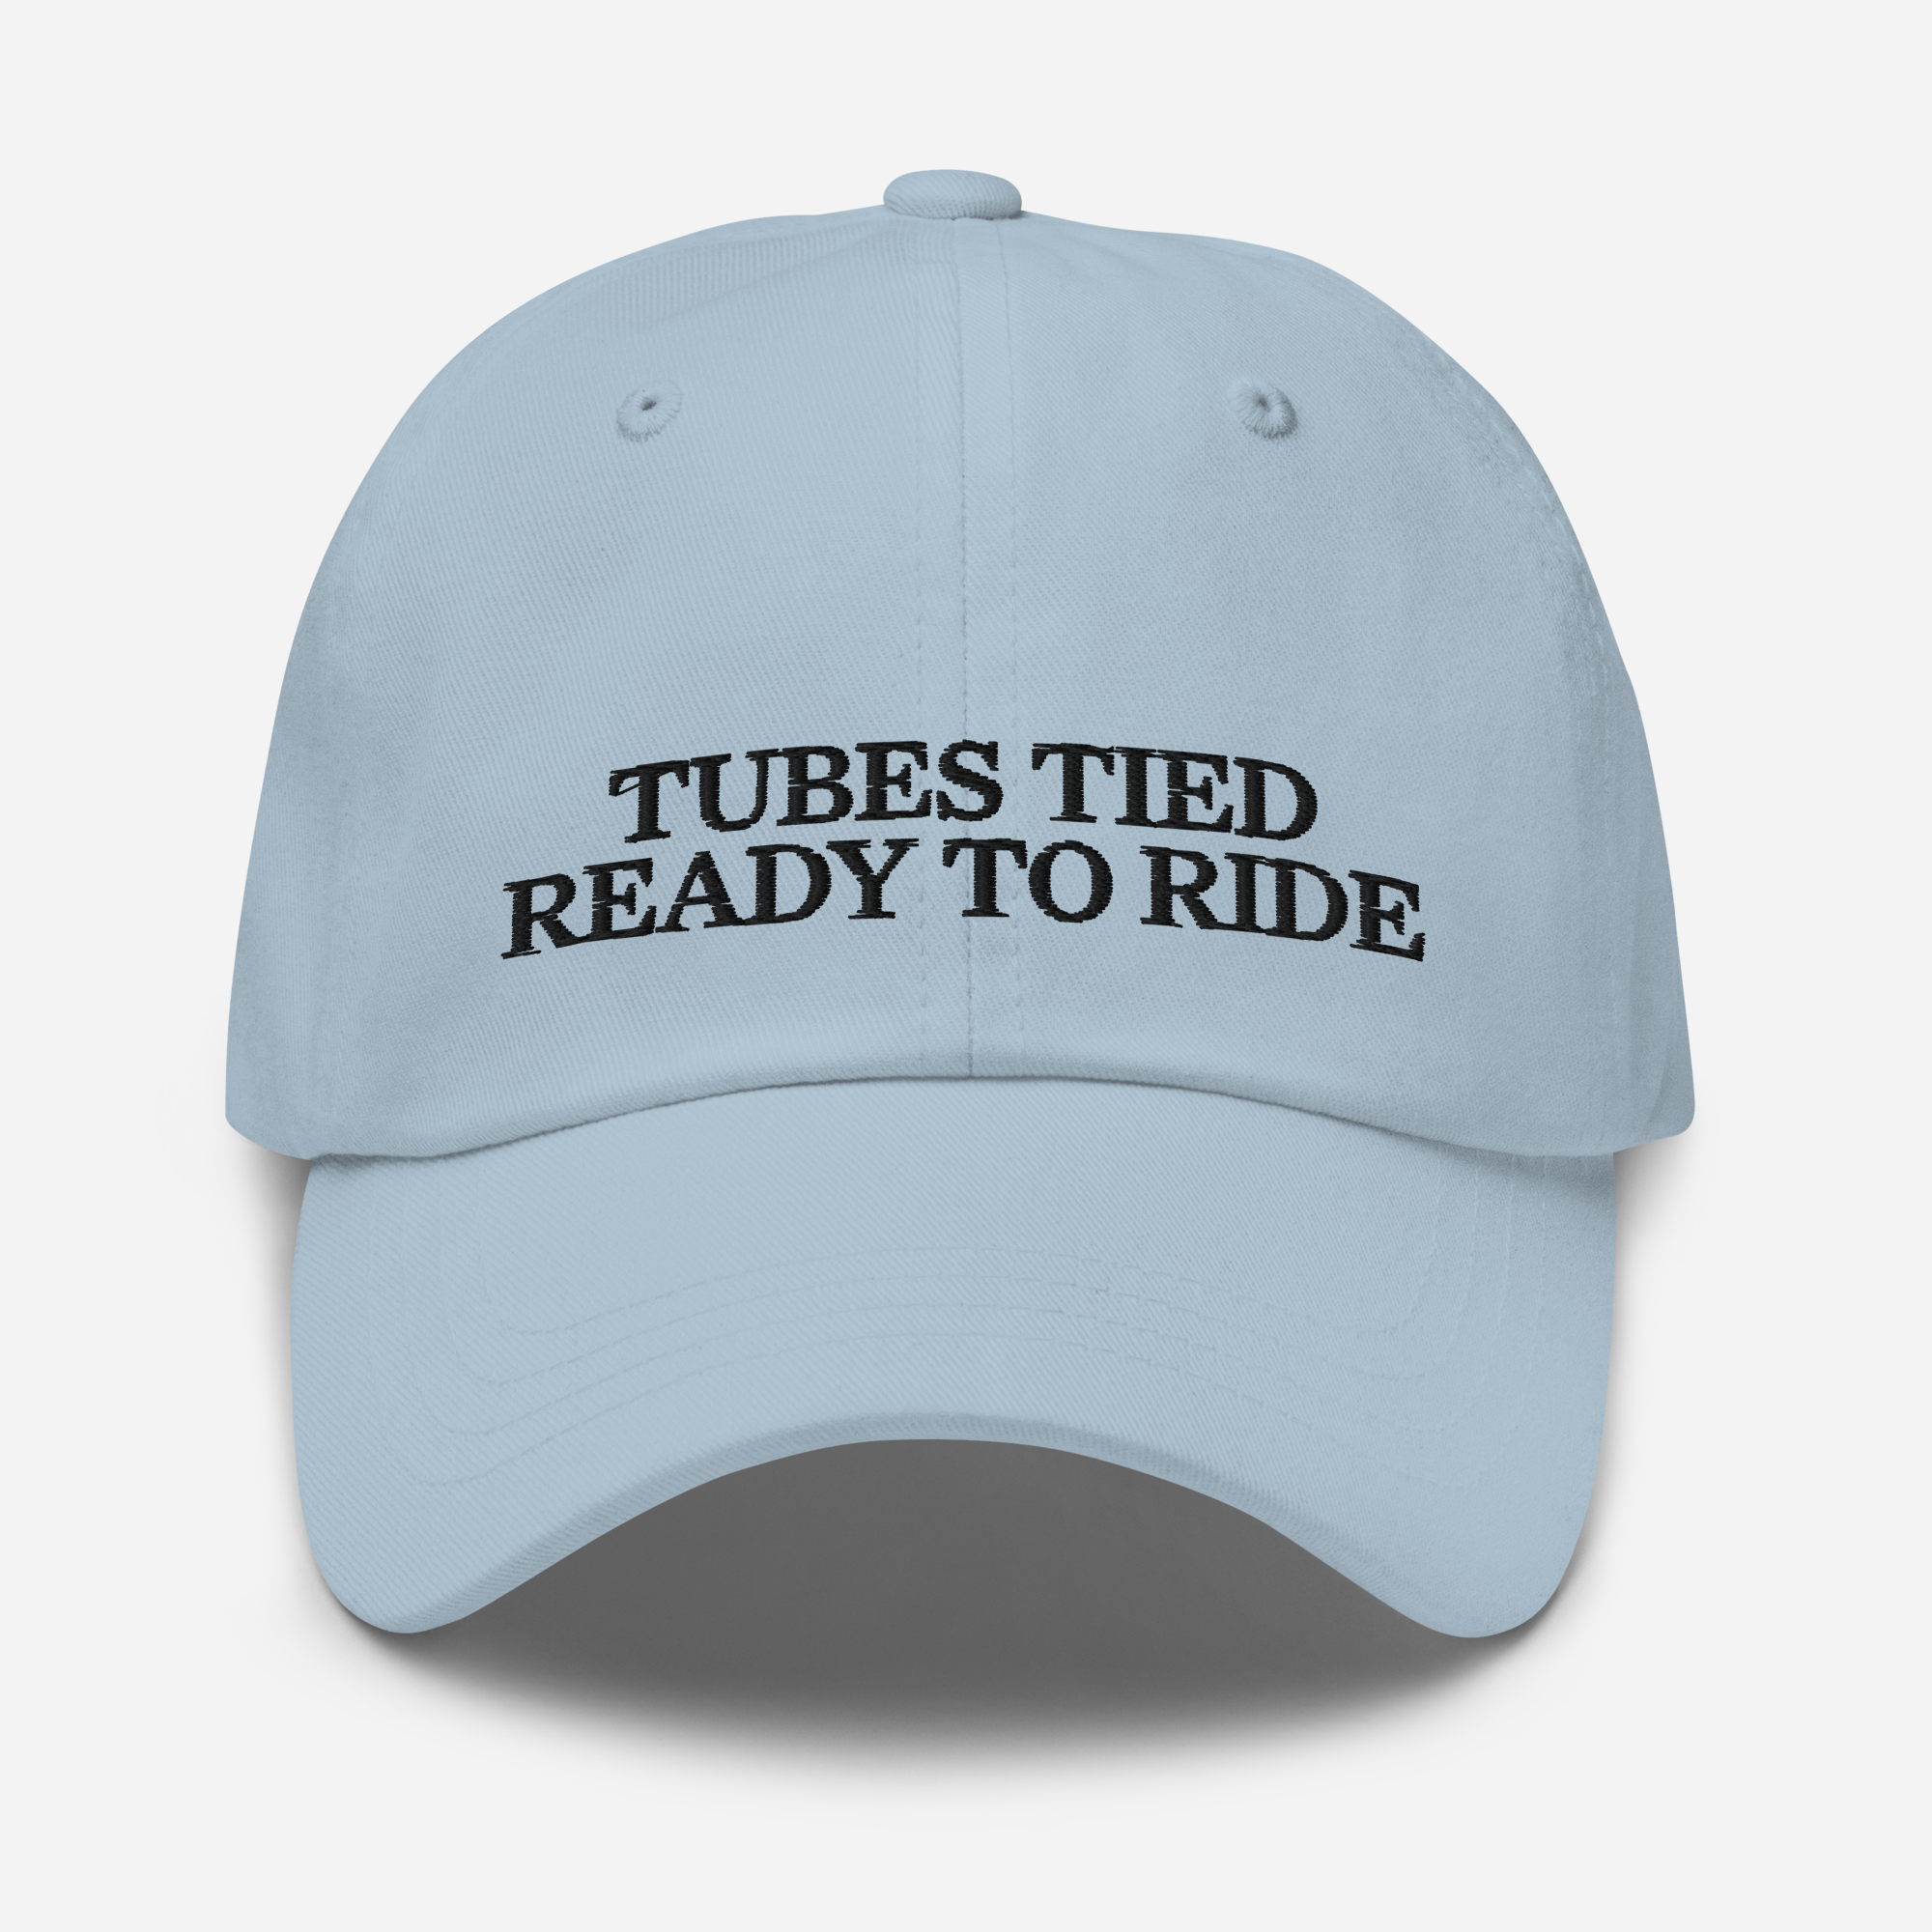 Tubes Tied Ready to Ride dad cap light blue